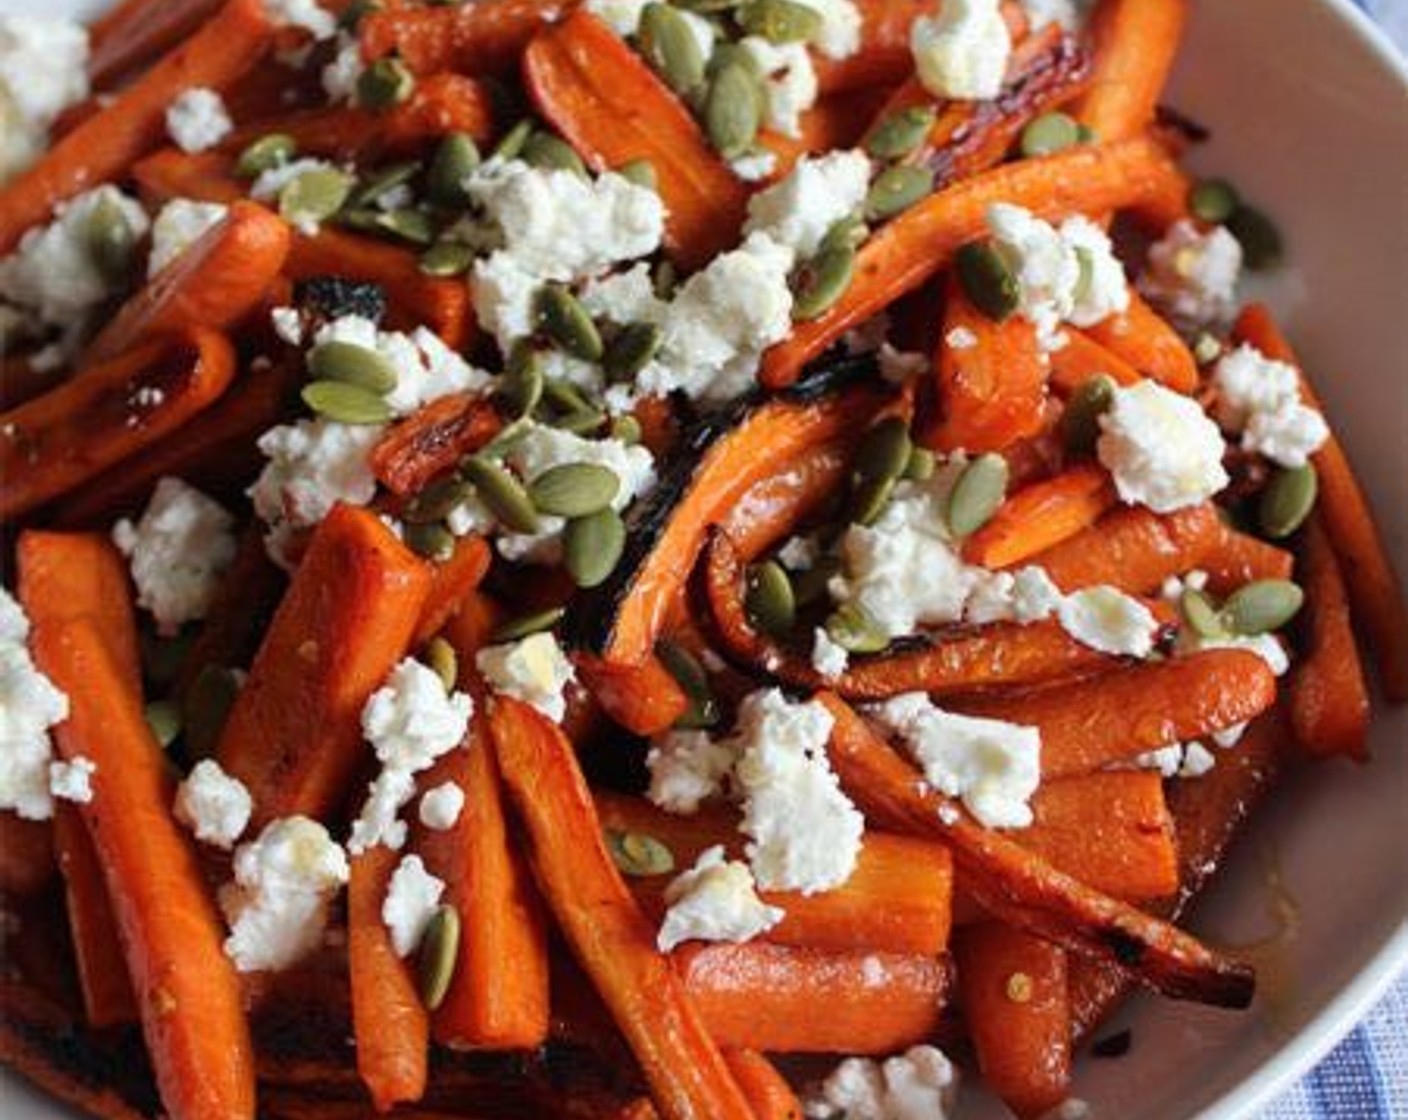 step 6 To serve, place the carrots in a shallow serving dish. Top with the Goat Cheese (4 Tbsp), Pepitas (3 Tbsp), Honey (1 Tbsp), and a sprinkle of Salt (to taste) if desired. Serve warm or at room temperature.